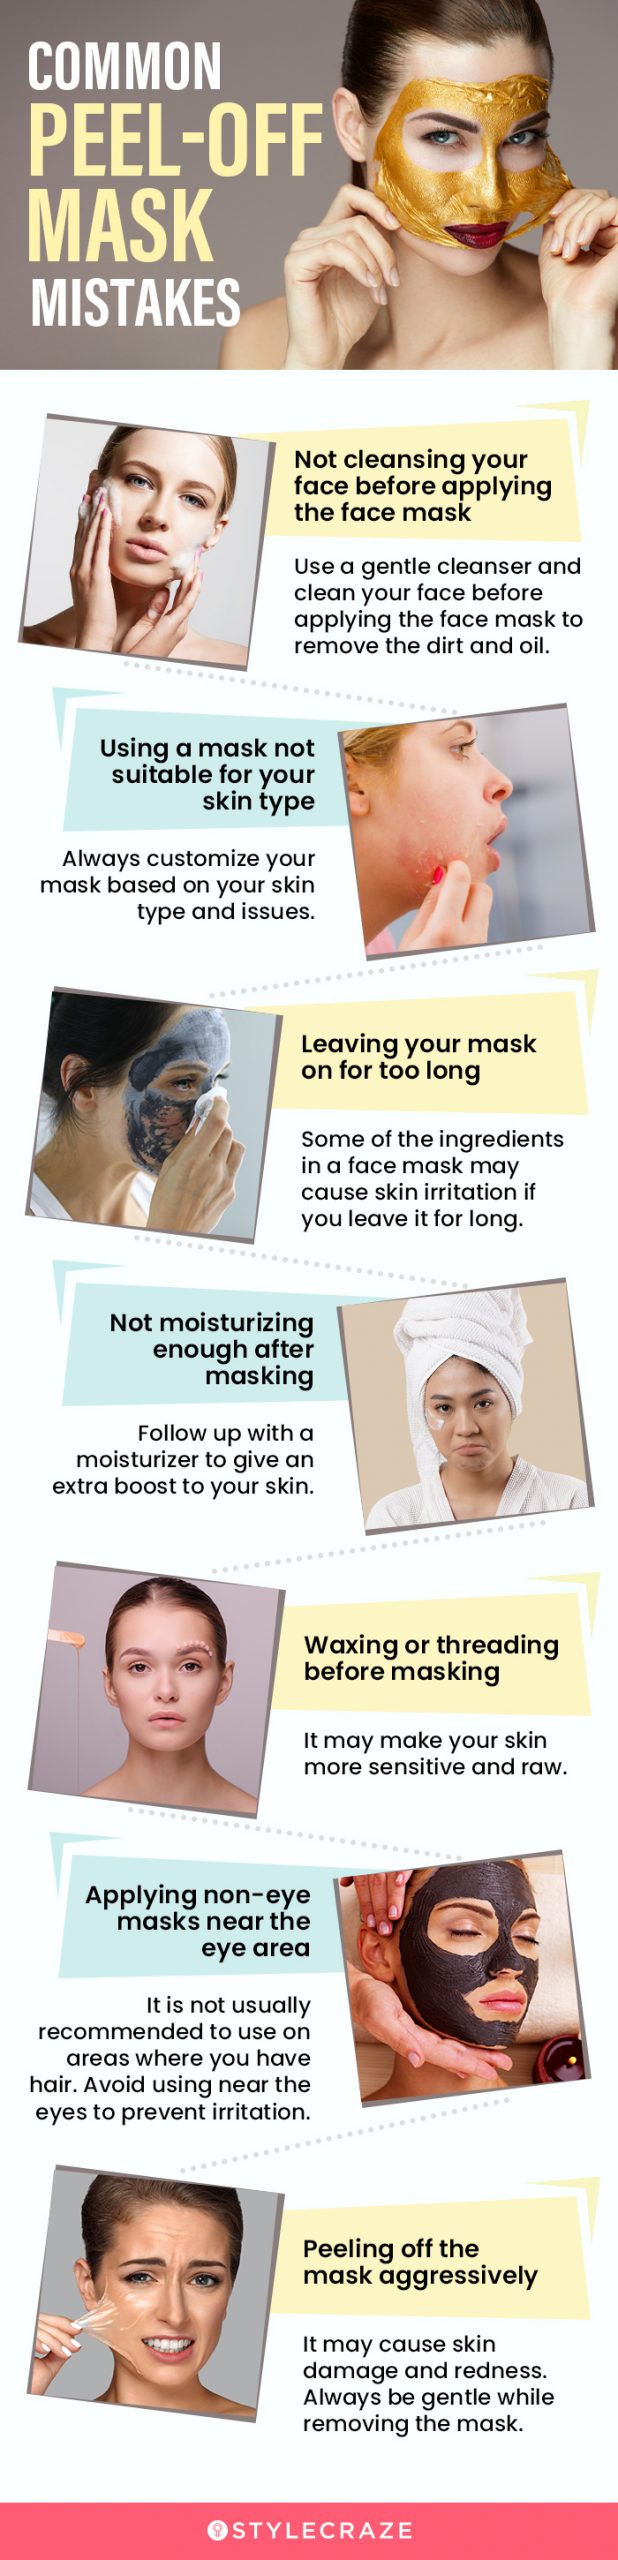 common peel off mask mistakes [infographic]